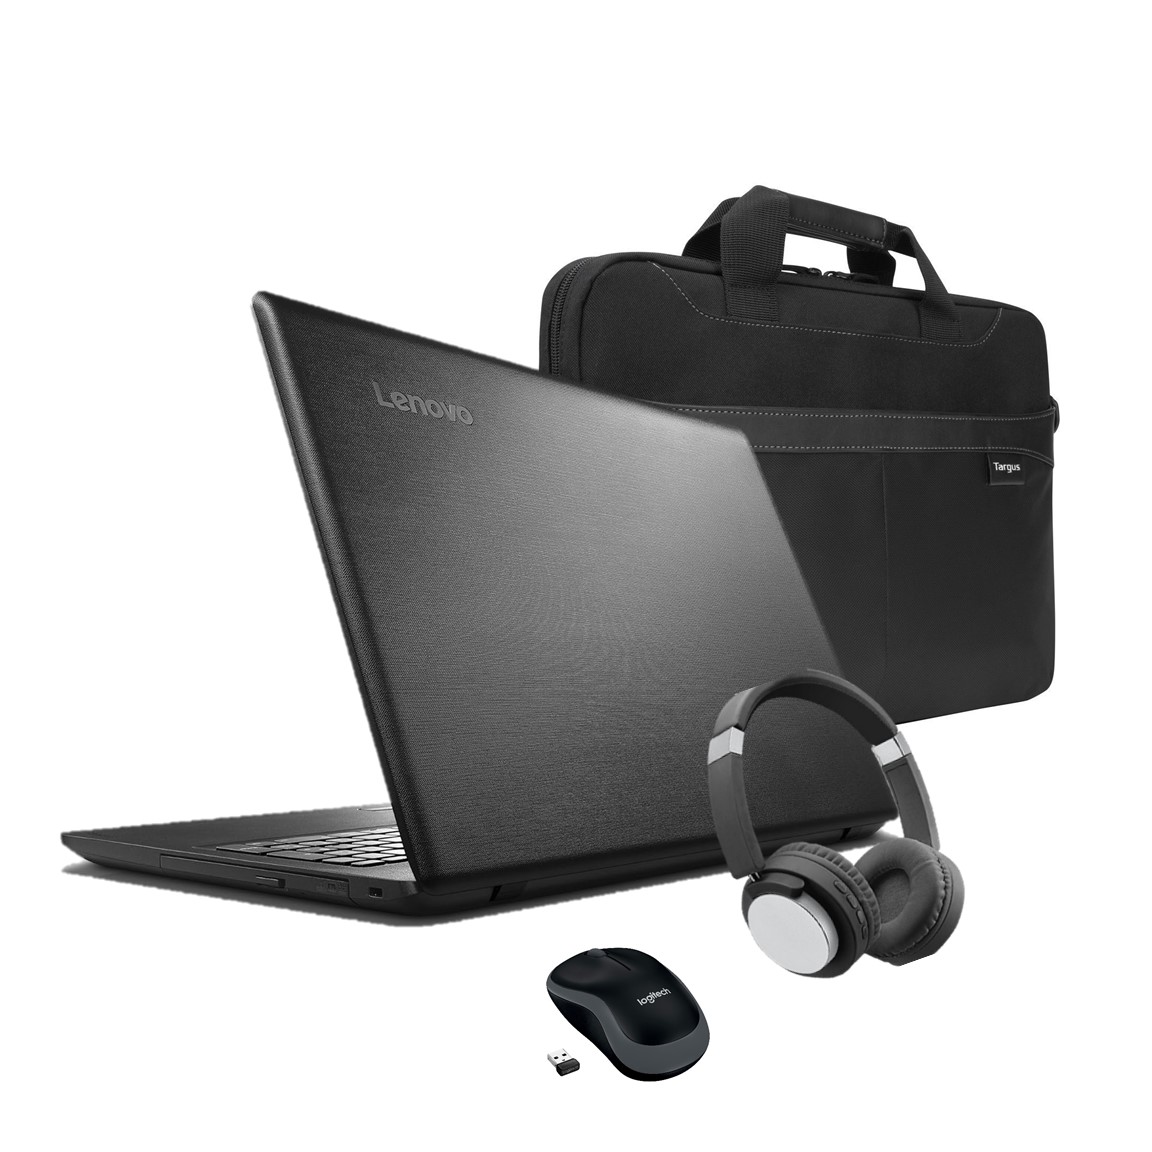 Laptop with Back Headphones and Mouse